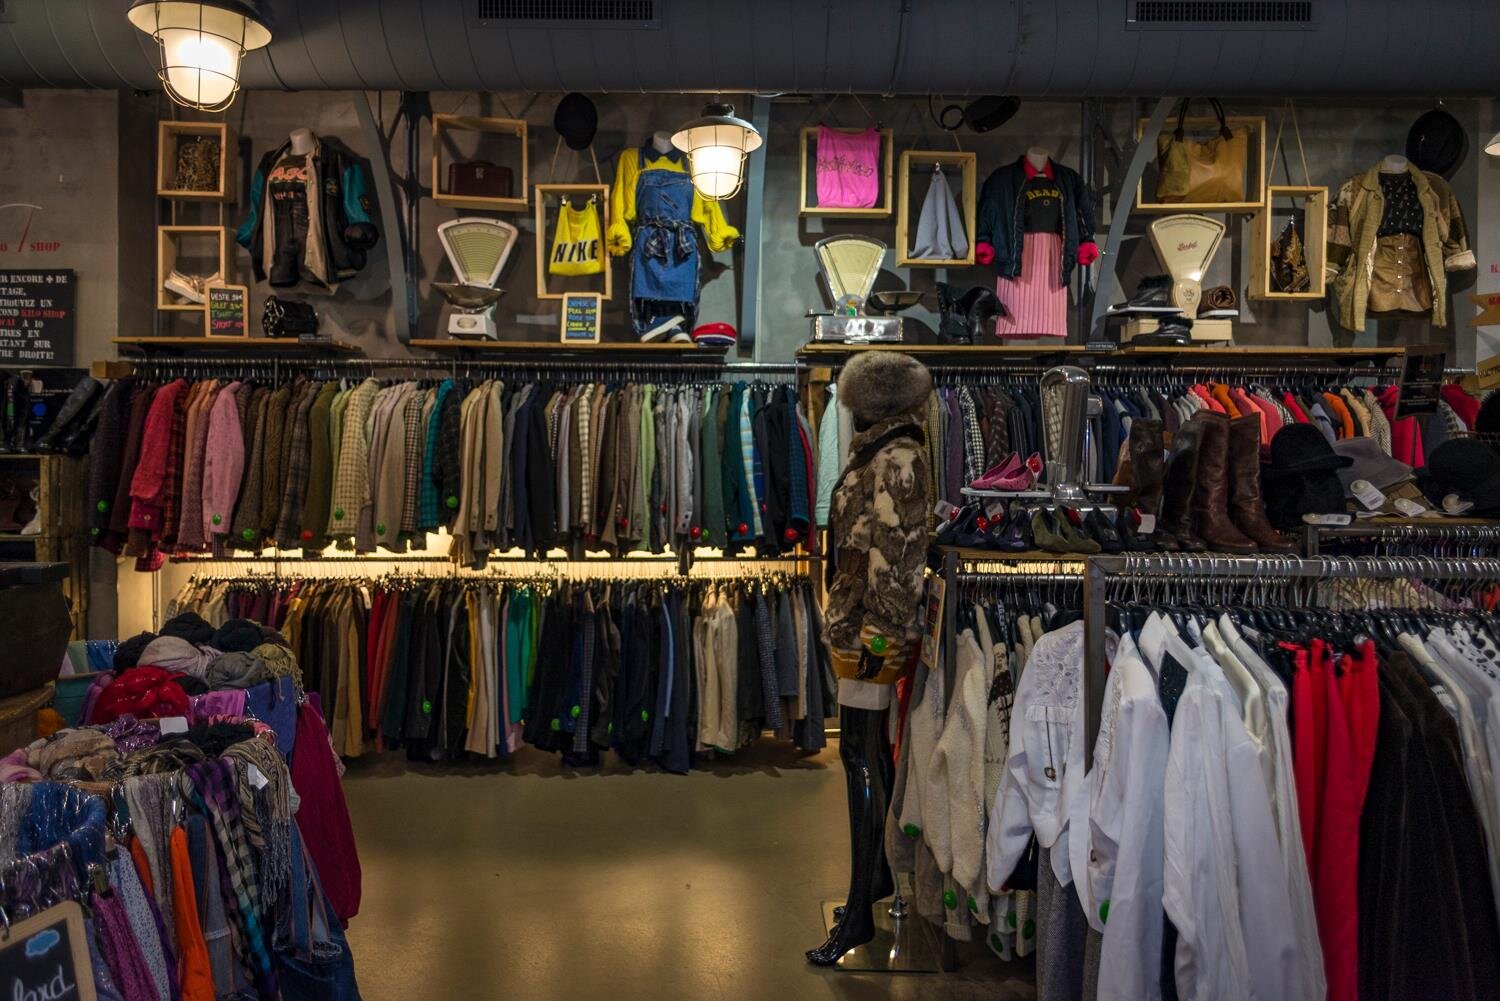 Shopping a Paris Thrift Store, France's Version of Goodwill